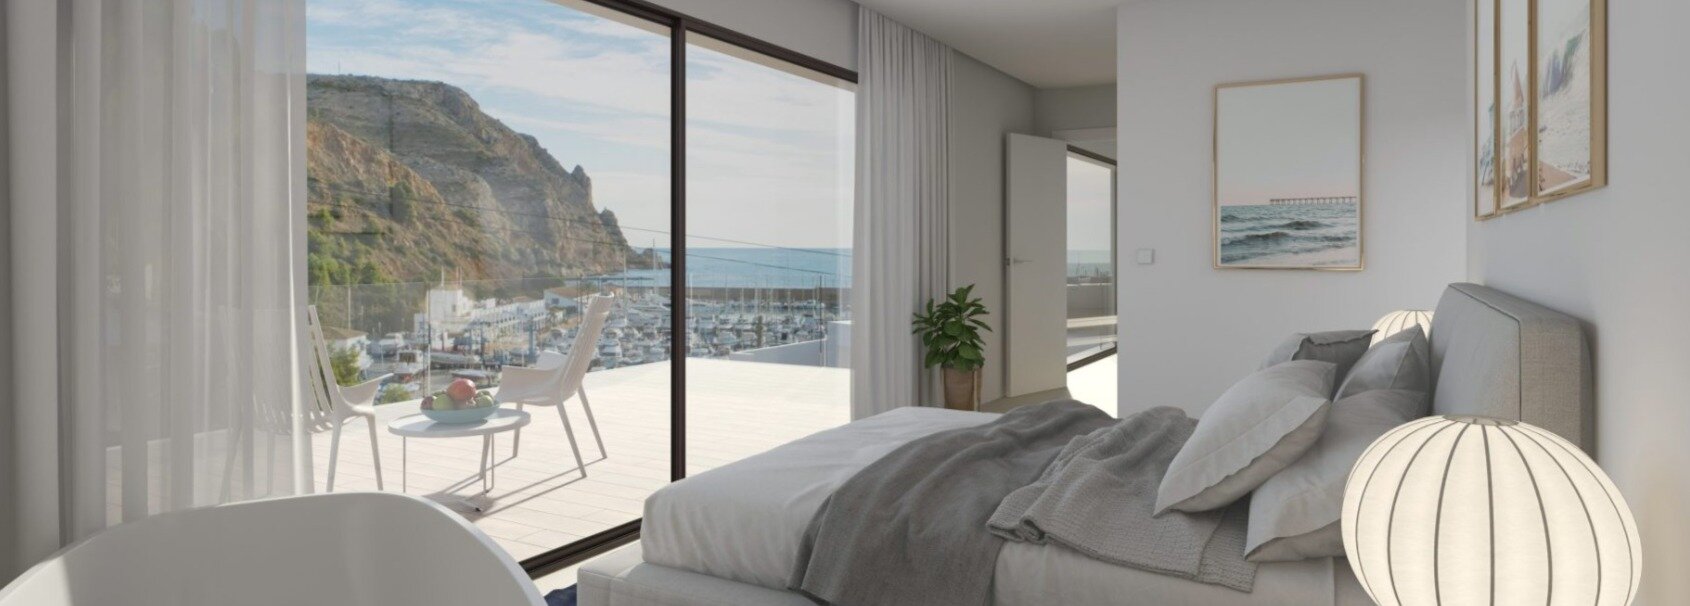   Jávea, Alicante, Spain &nbsp;-- US $2,861,490  Represented by&nbsp; Immobiliaria Rimontgo , founding member of&nbsp; Forbes Global Properties   &nbsp;  This modern 4 bedroom villa offers panoramic views and is located in Jávea's Port, minutes away 